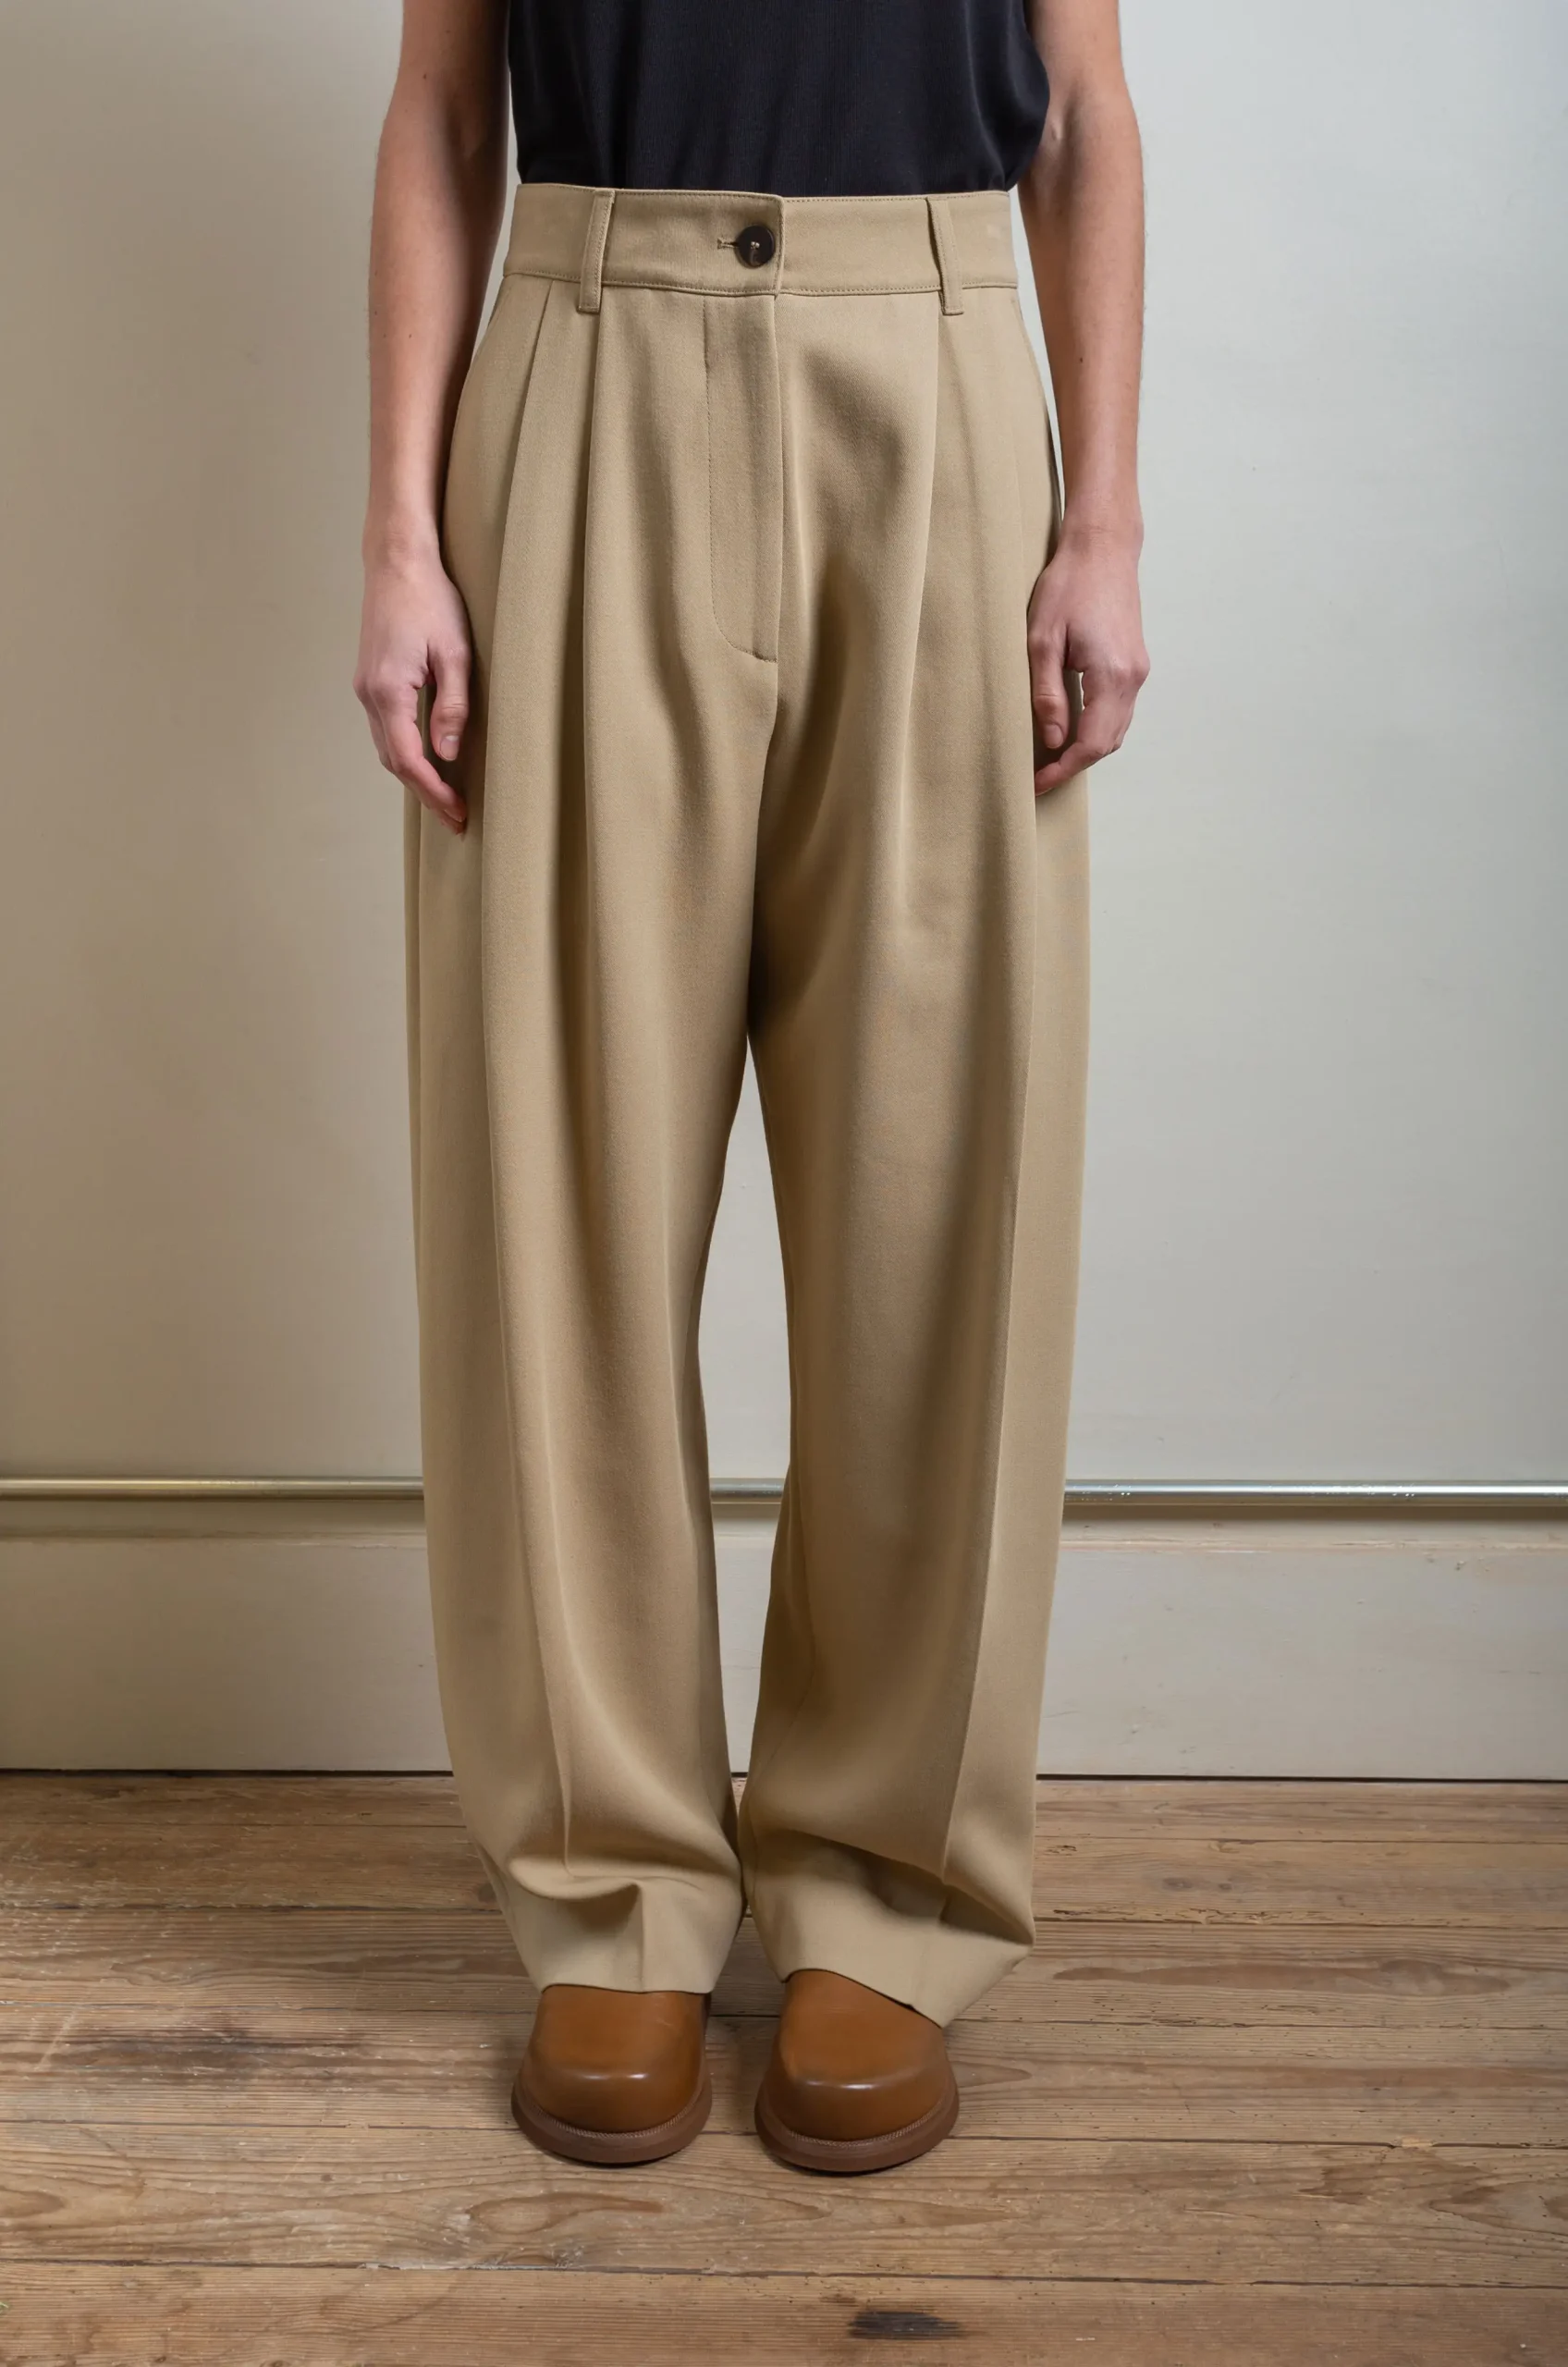 Studio Nicholson - Acuna Double Pleat Front Pant SNW 1188 - Sand